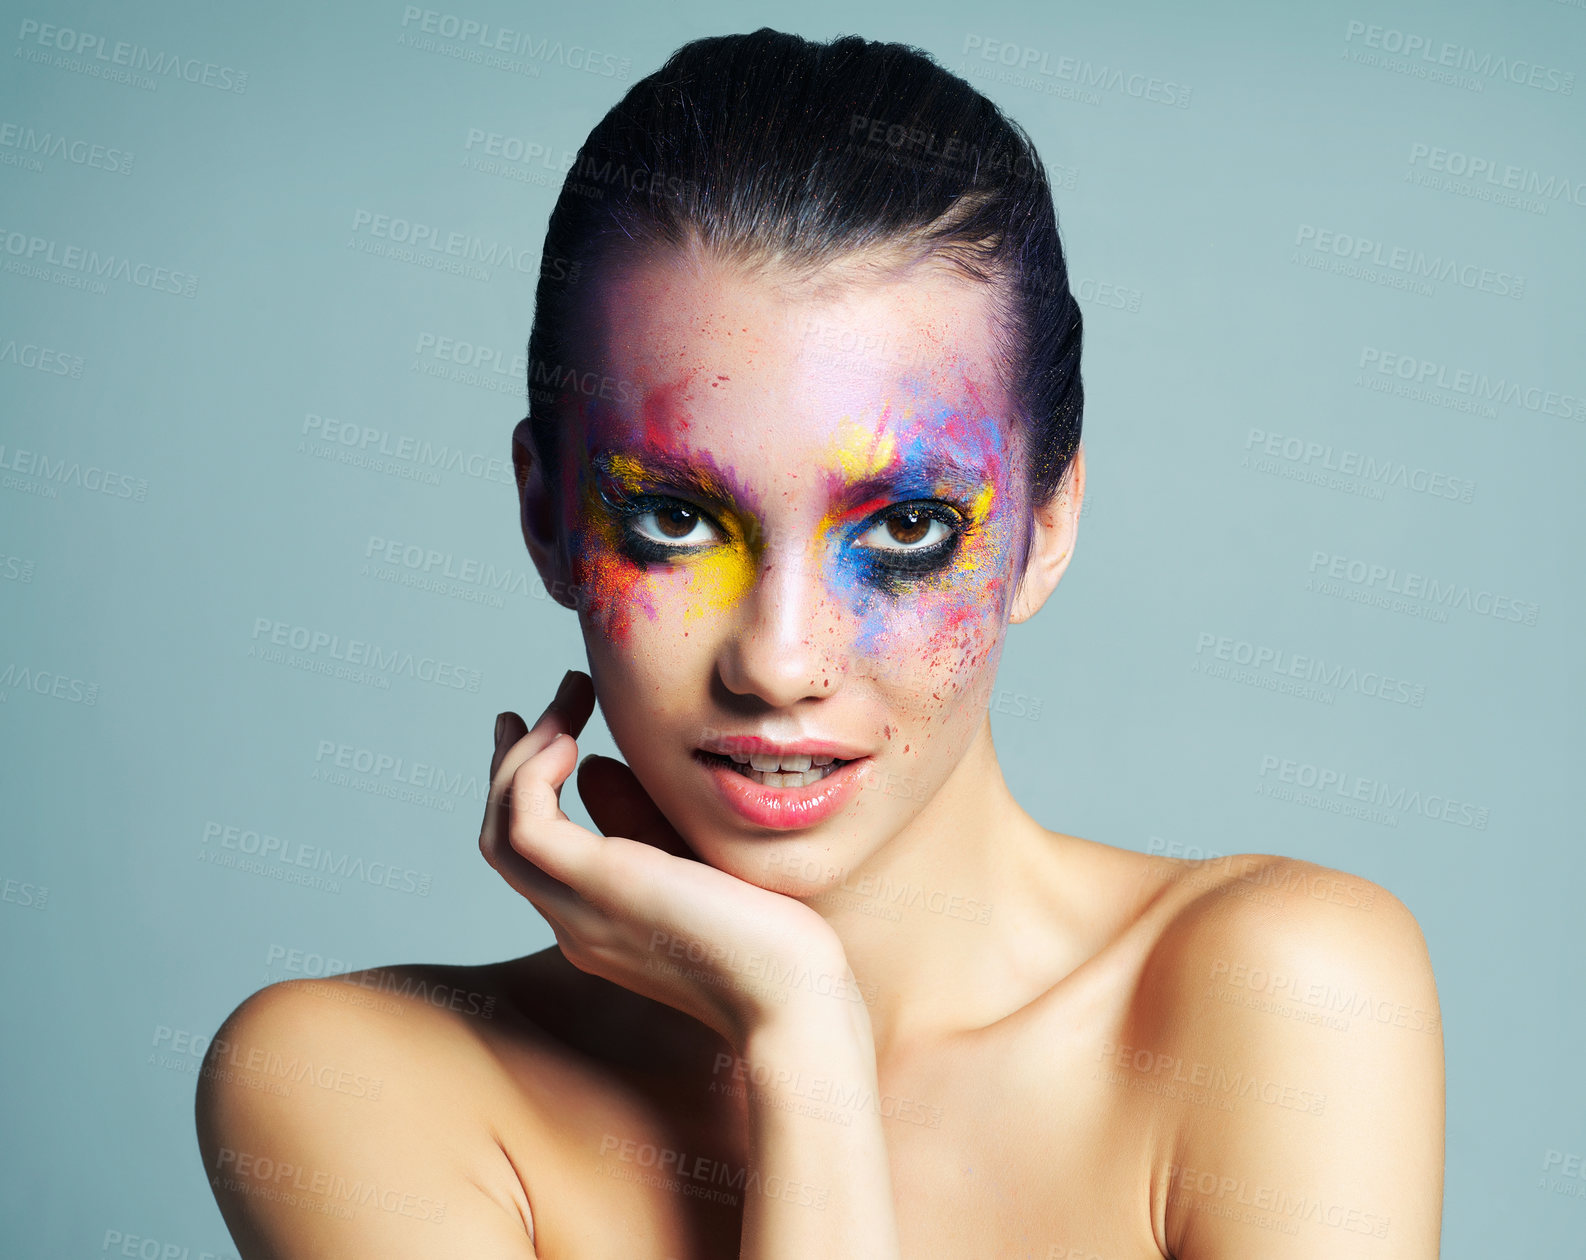 Buy stock photo Studio shot of an attractive young woman with brightly colored makeup against a blue background